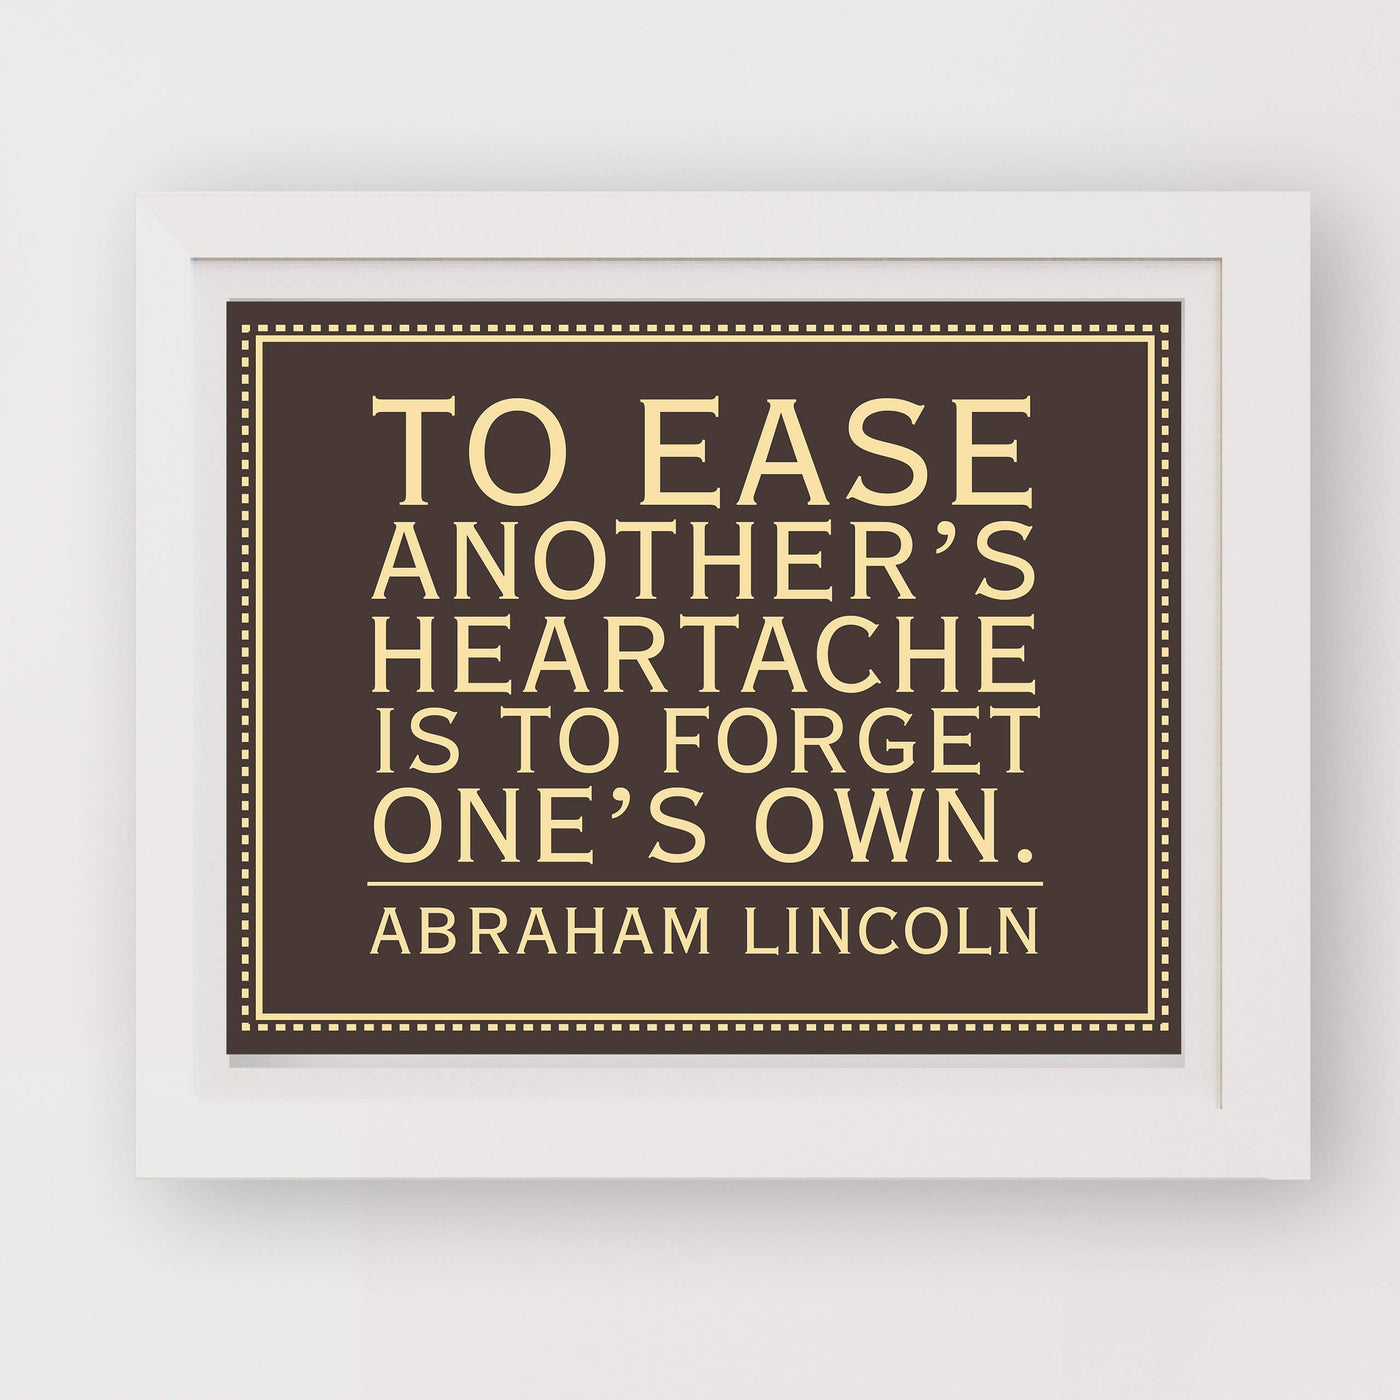 Abraham Lincoln Quotes-"To Ease Another's Heartache Is to Forget One's Own"-Motivational Wall Art -10x8" Typographic Print-Ready to Frame. History Quote for Home-Office-Library-Classroom Decor!